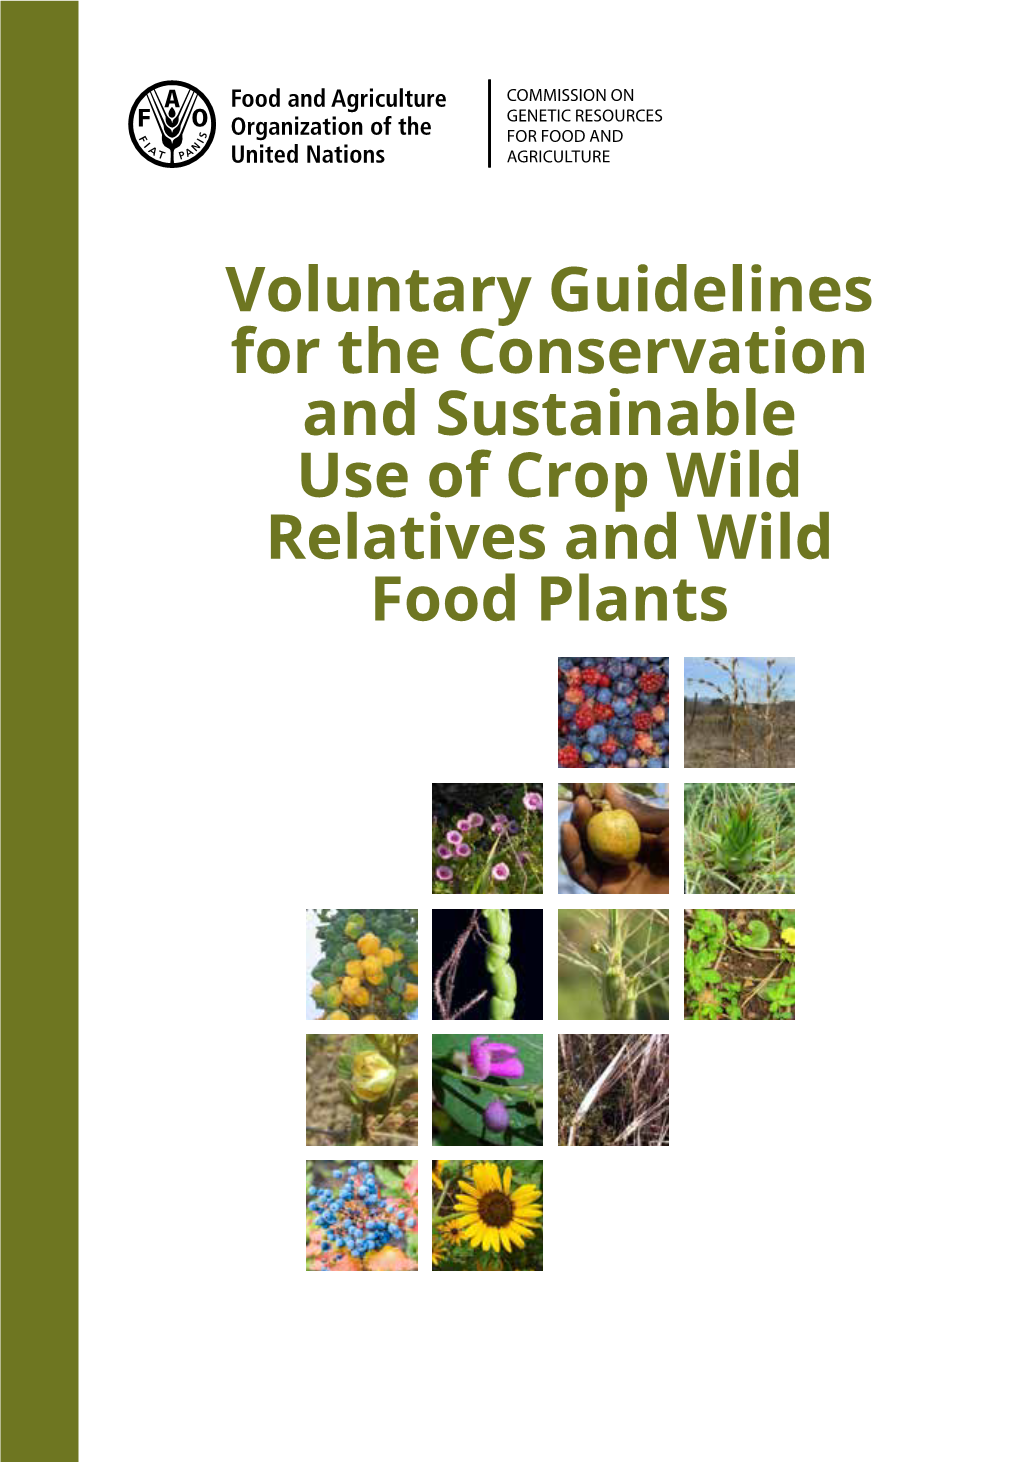 Voluntary Guidelines for the Conservation and Sustainable Use of Crop Wild Relatives Food Plants